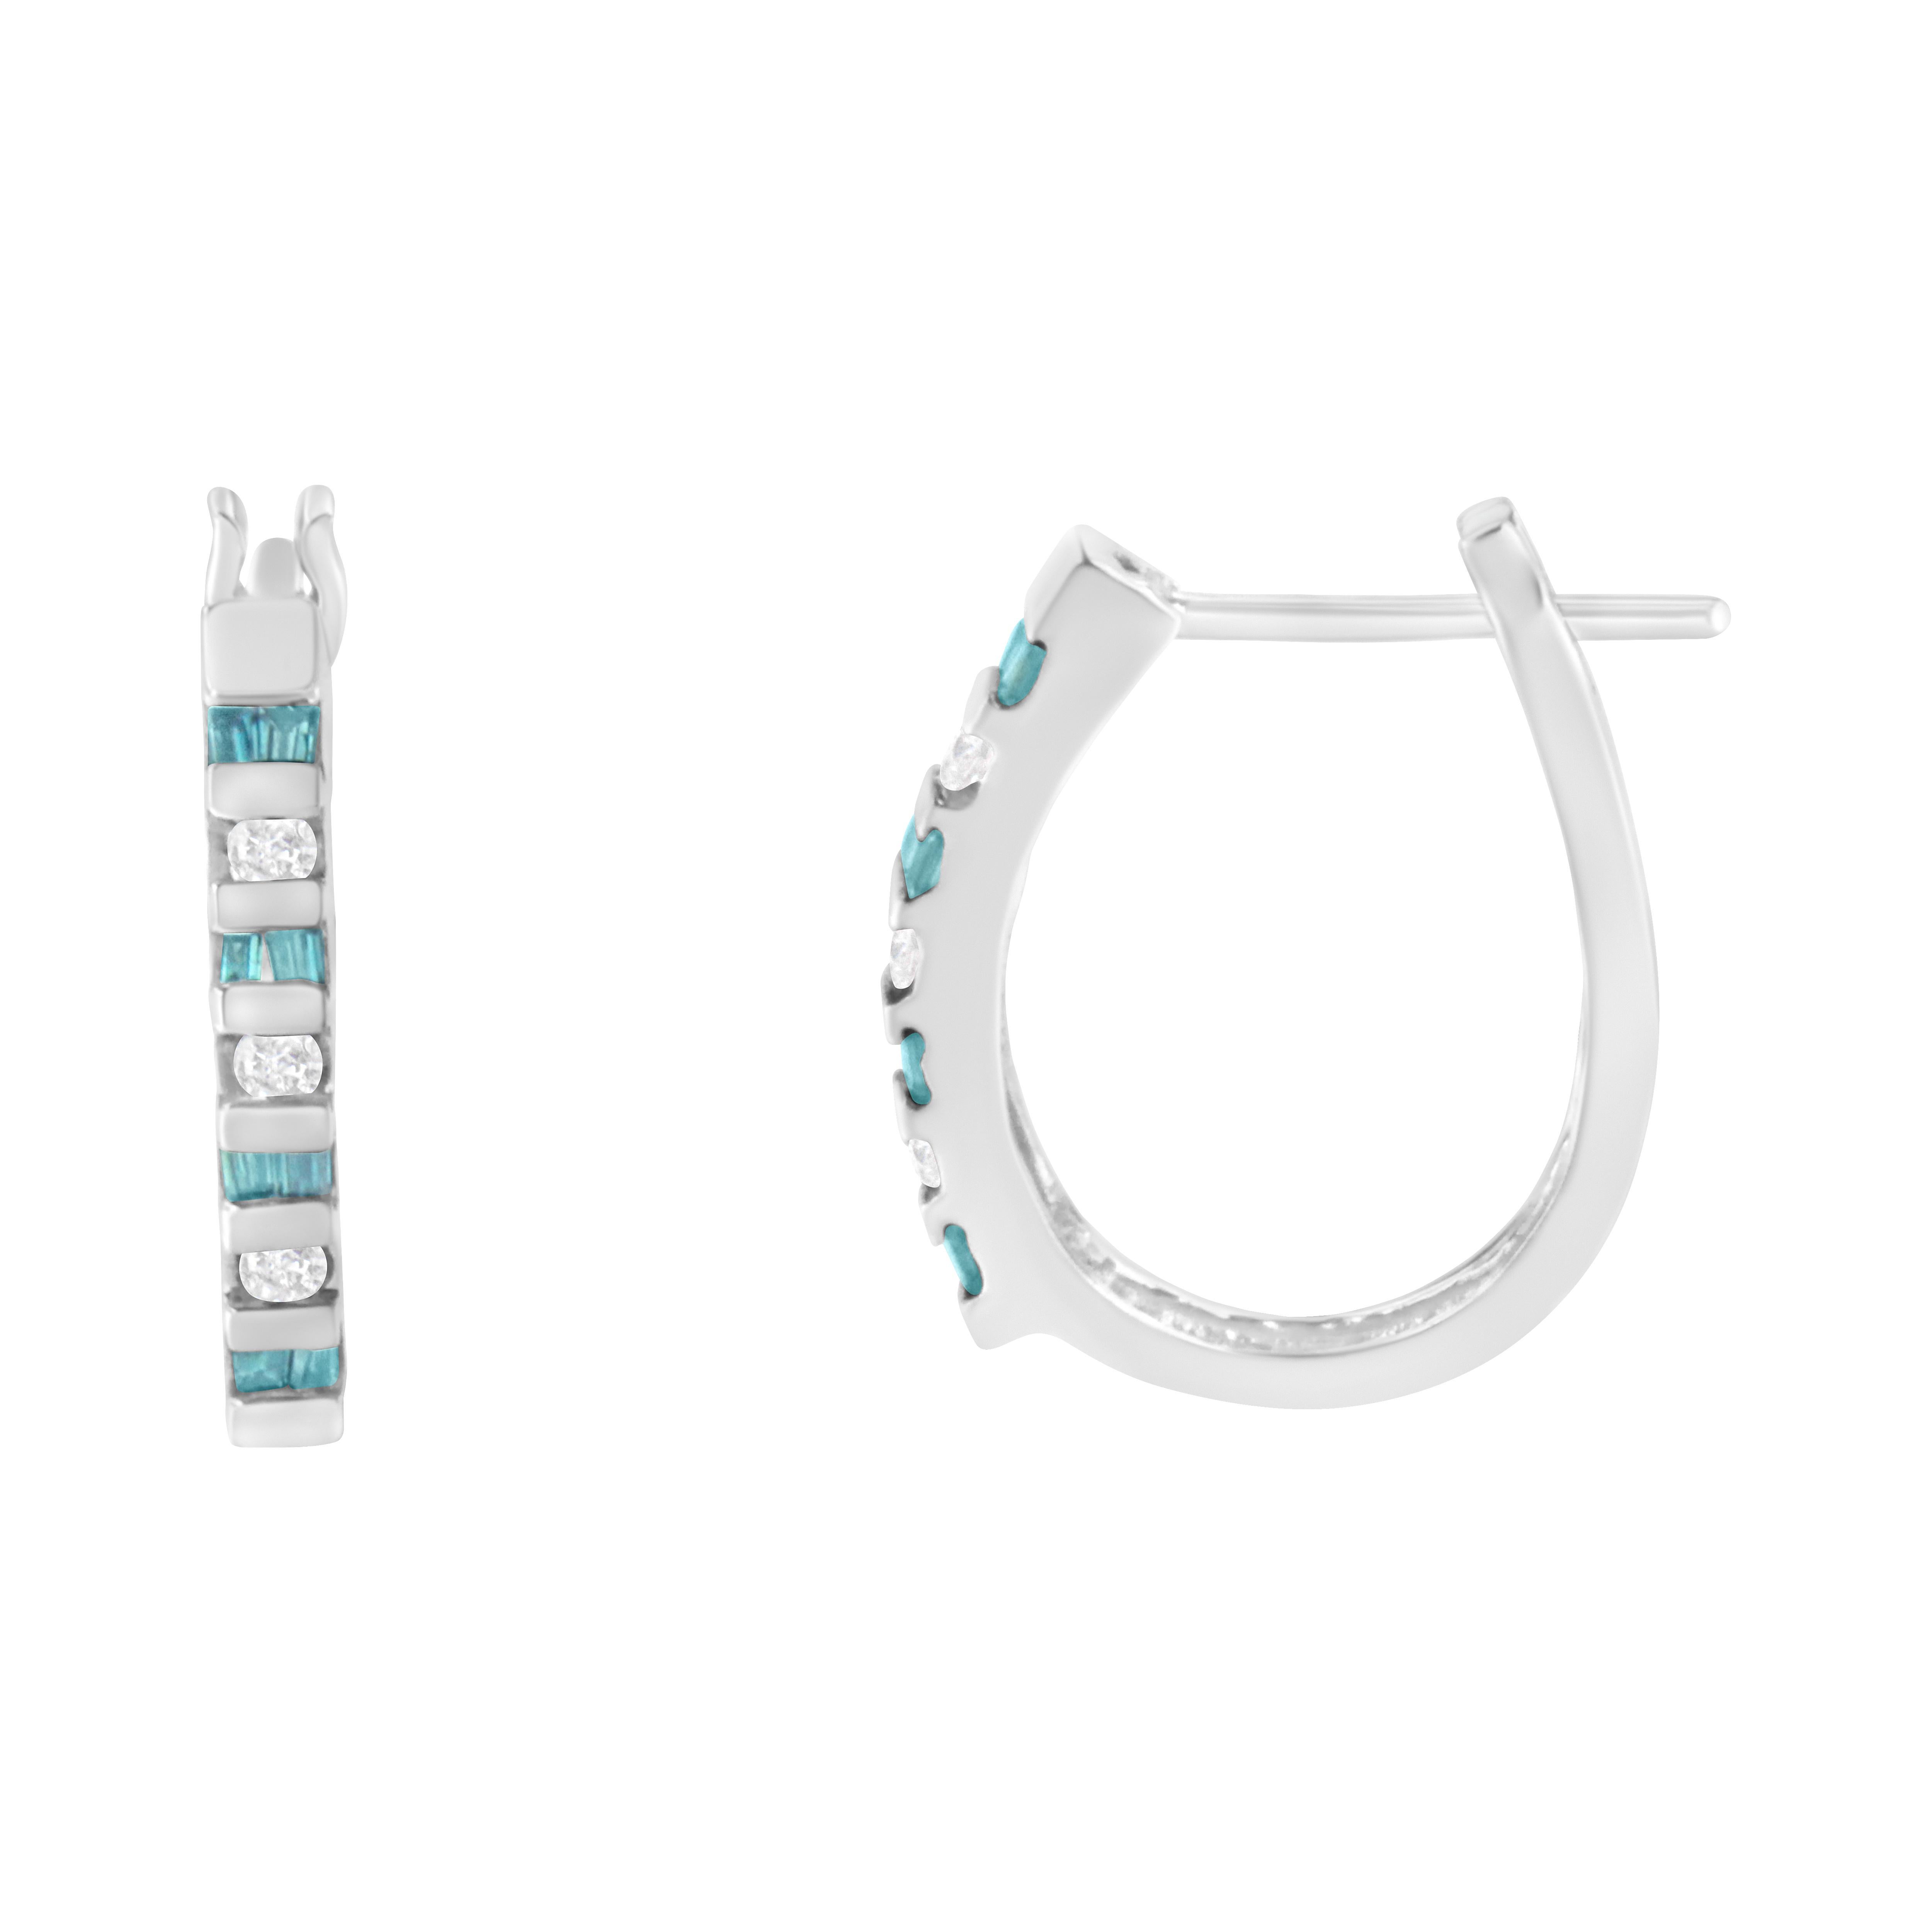 Dazzle with these 10-karat diamond hoop earrings! This pair features brilliantly polished round cut white diamond, and baguette cut treated blue diamond encased in white gold and artfully arranged in a channel setting, thus making the whole of the